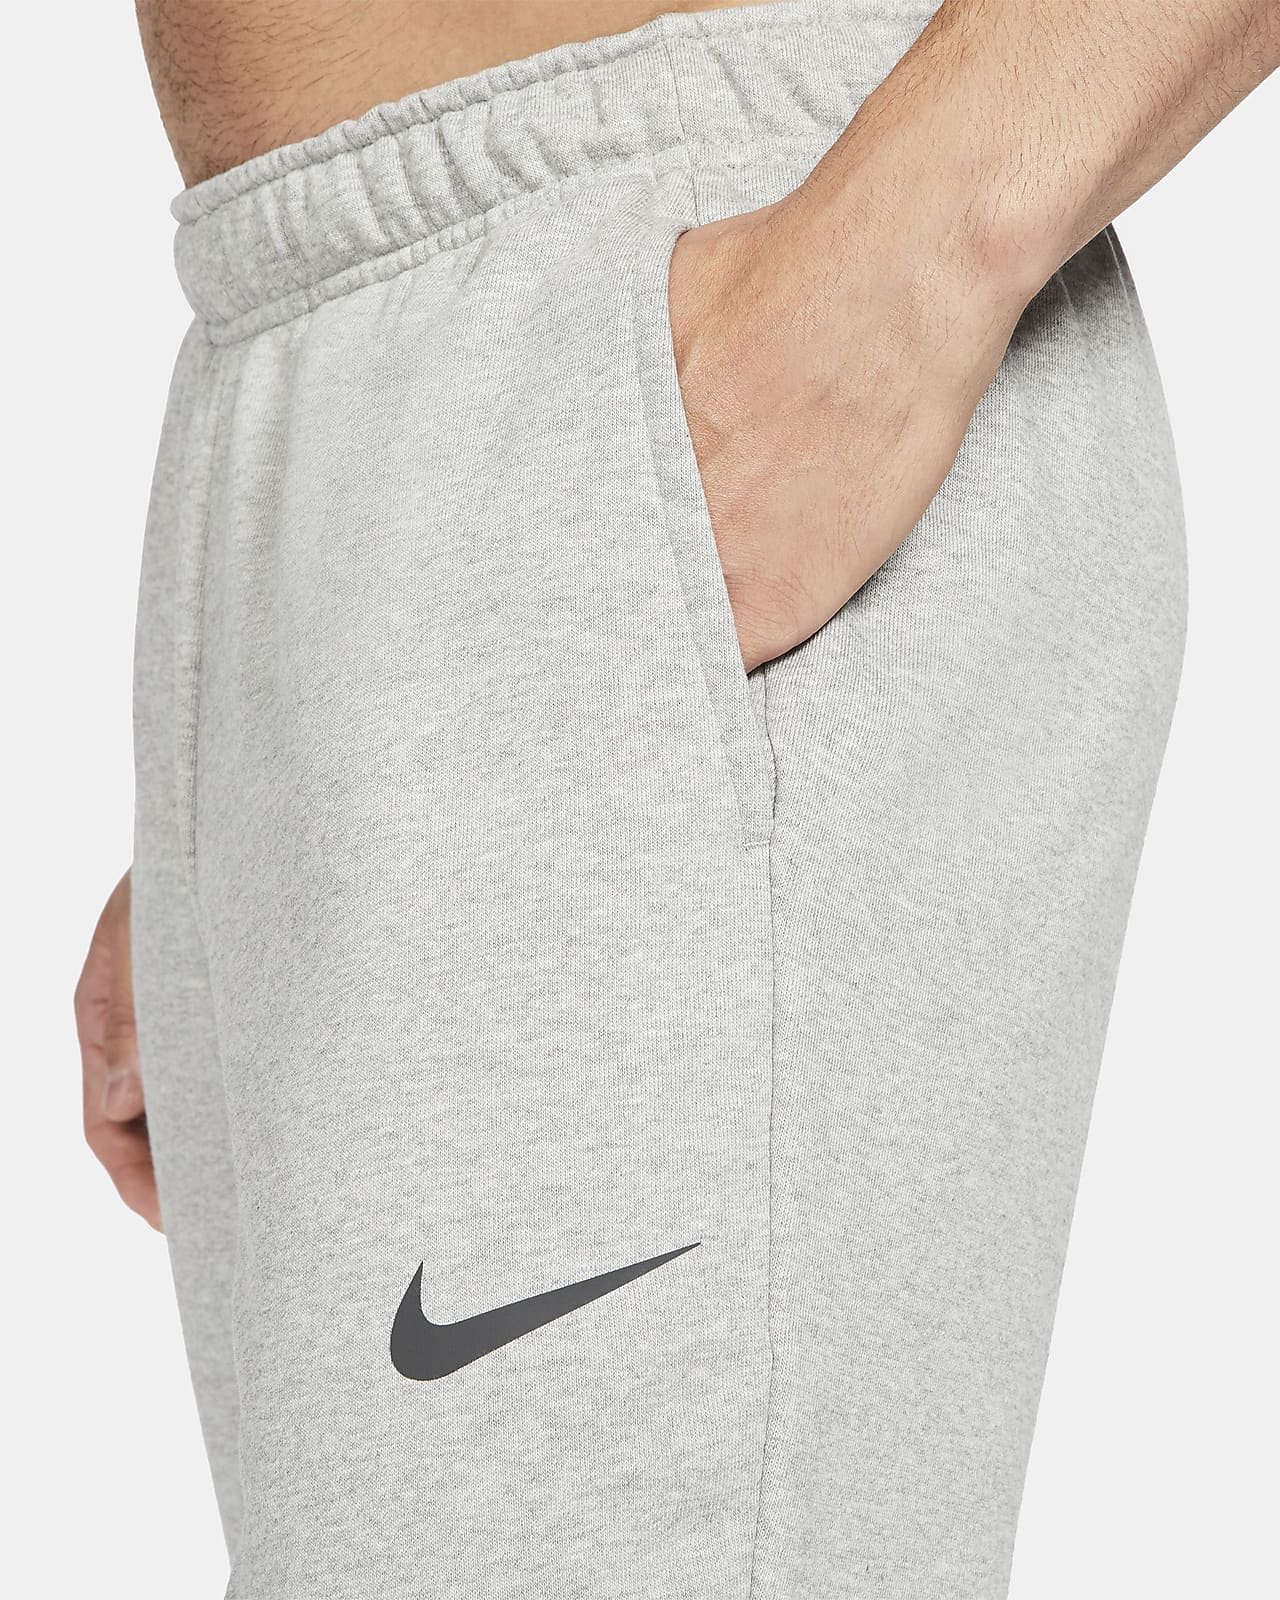 Boys Gym & Running Wet Weather Conditions Trousers. Nike ZA